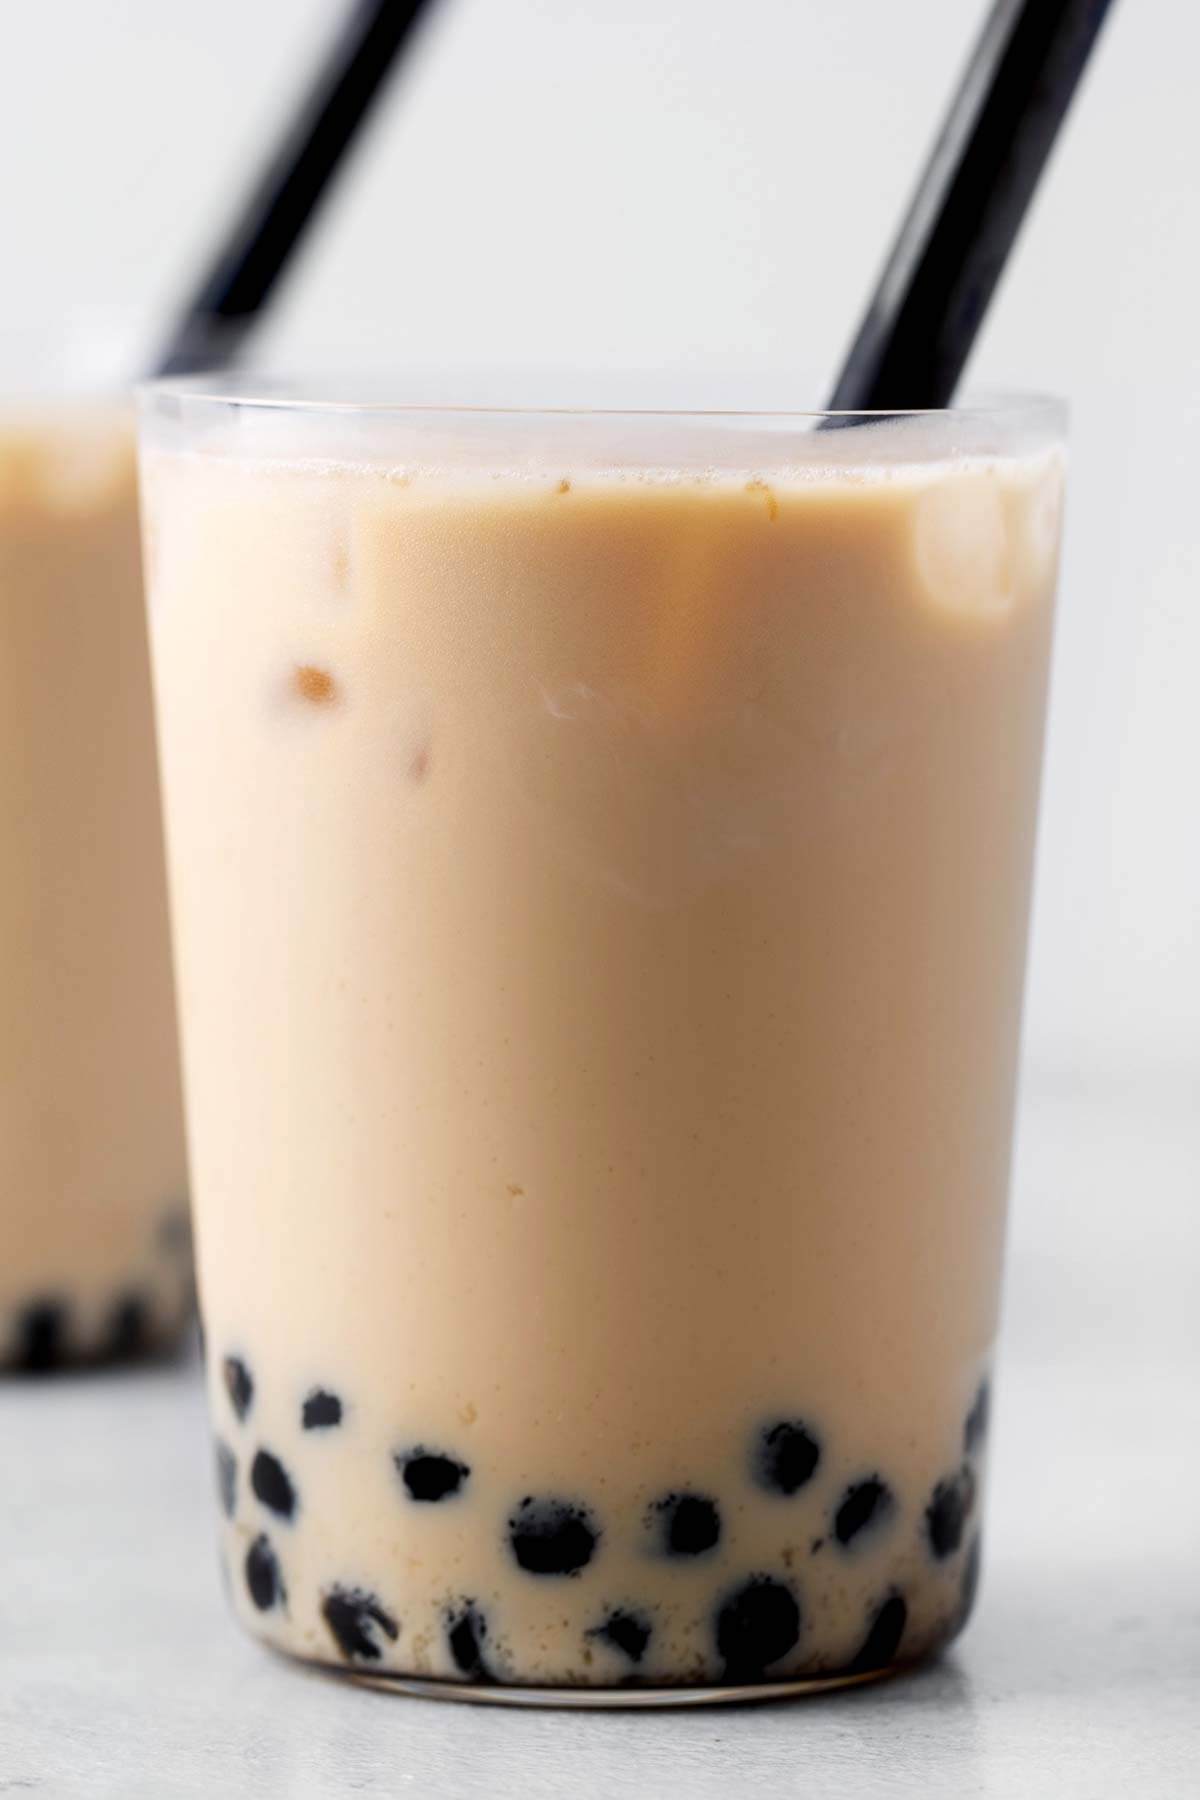 Bubble Tea: What It Is and How to Make It at Home